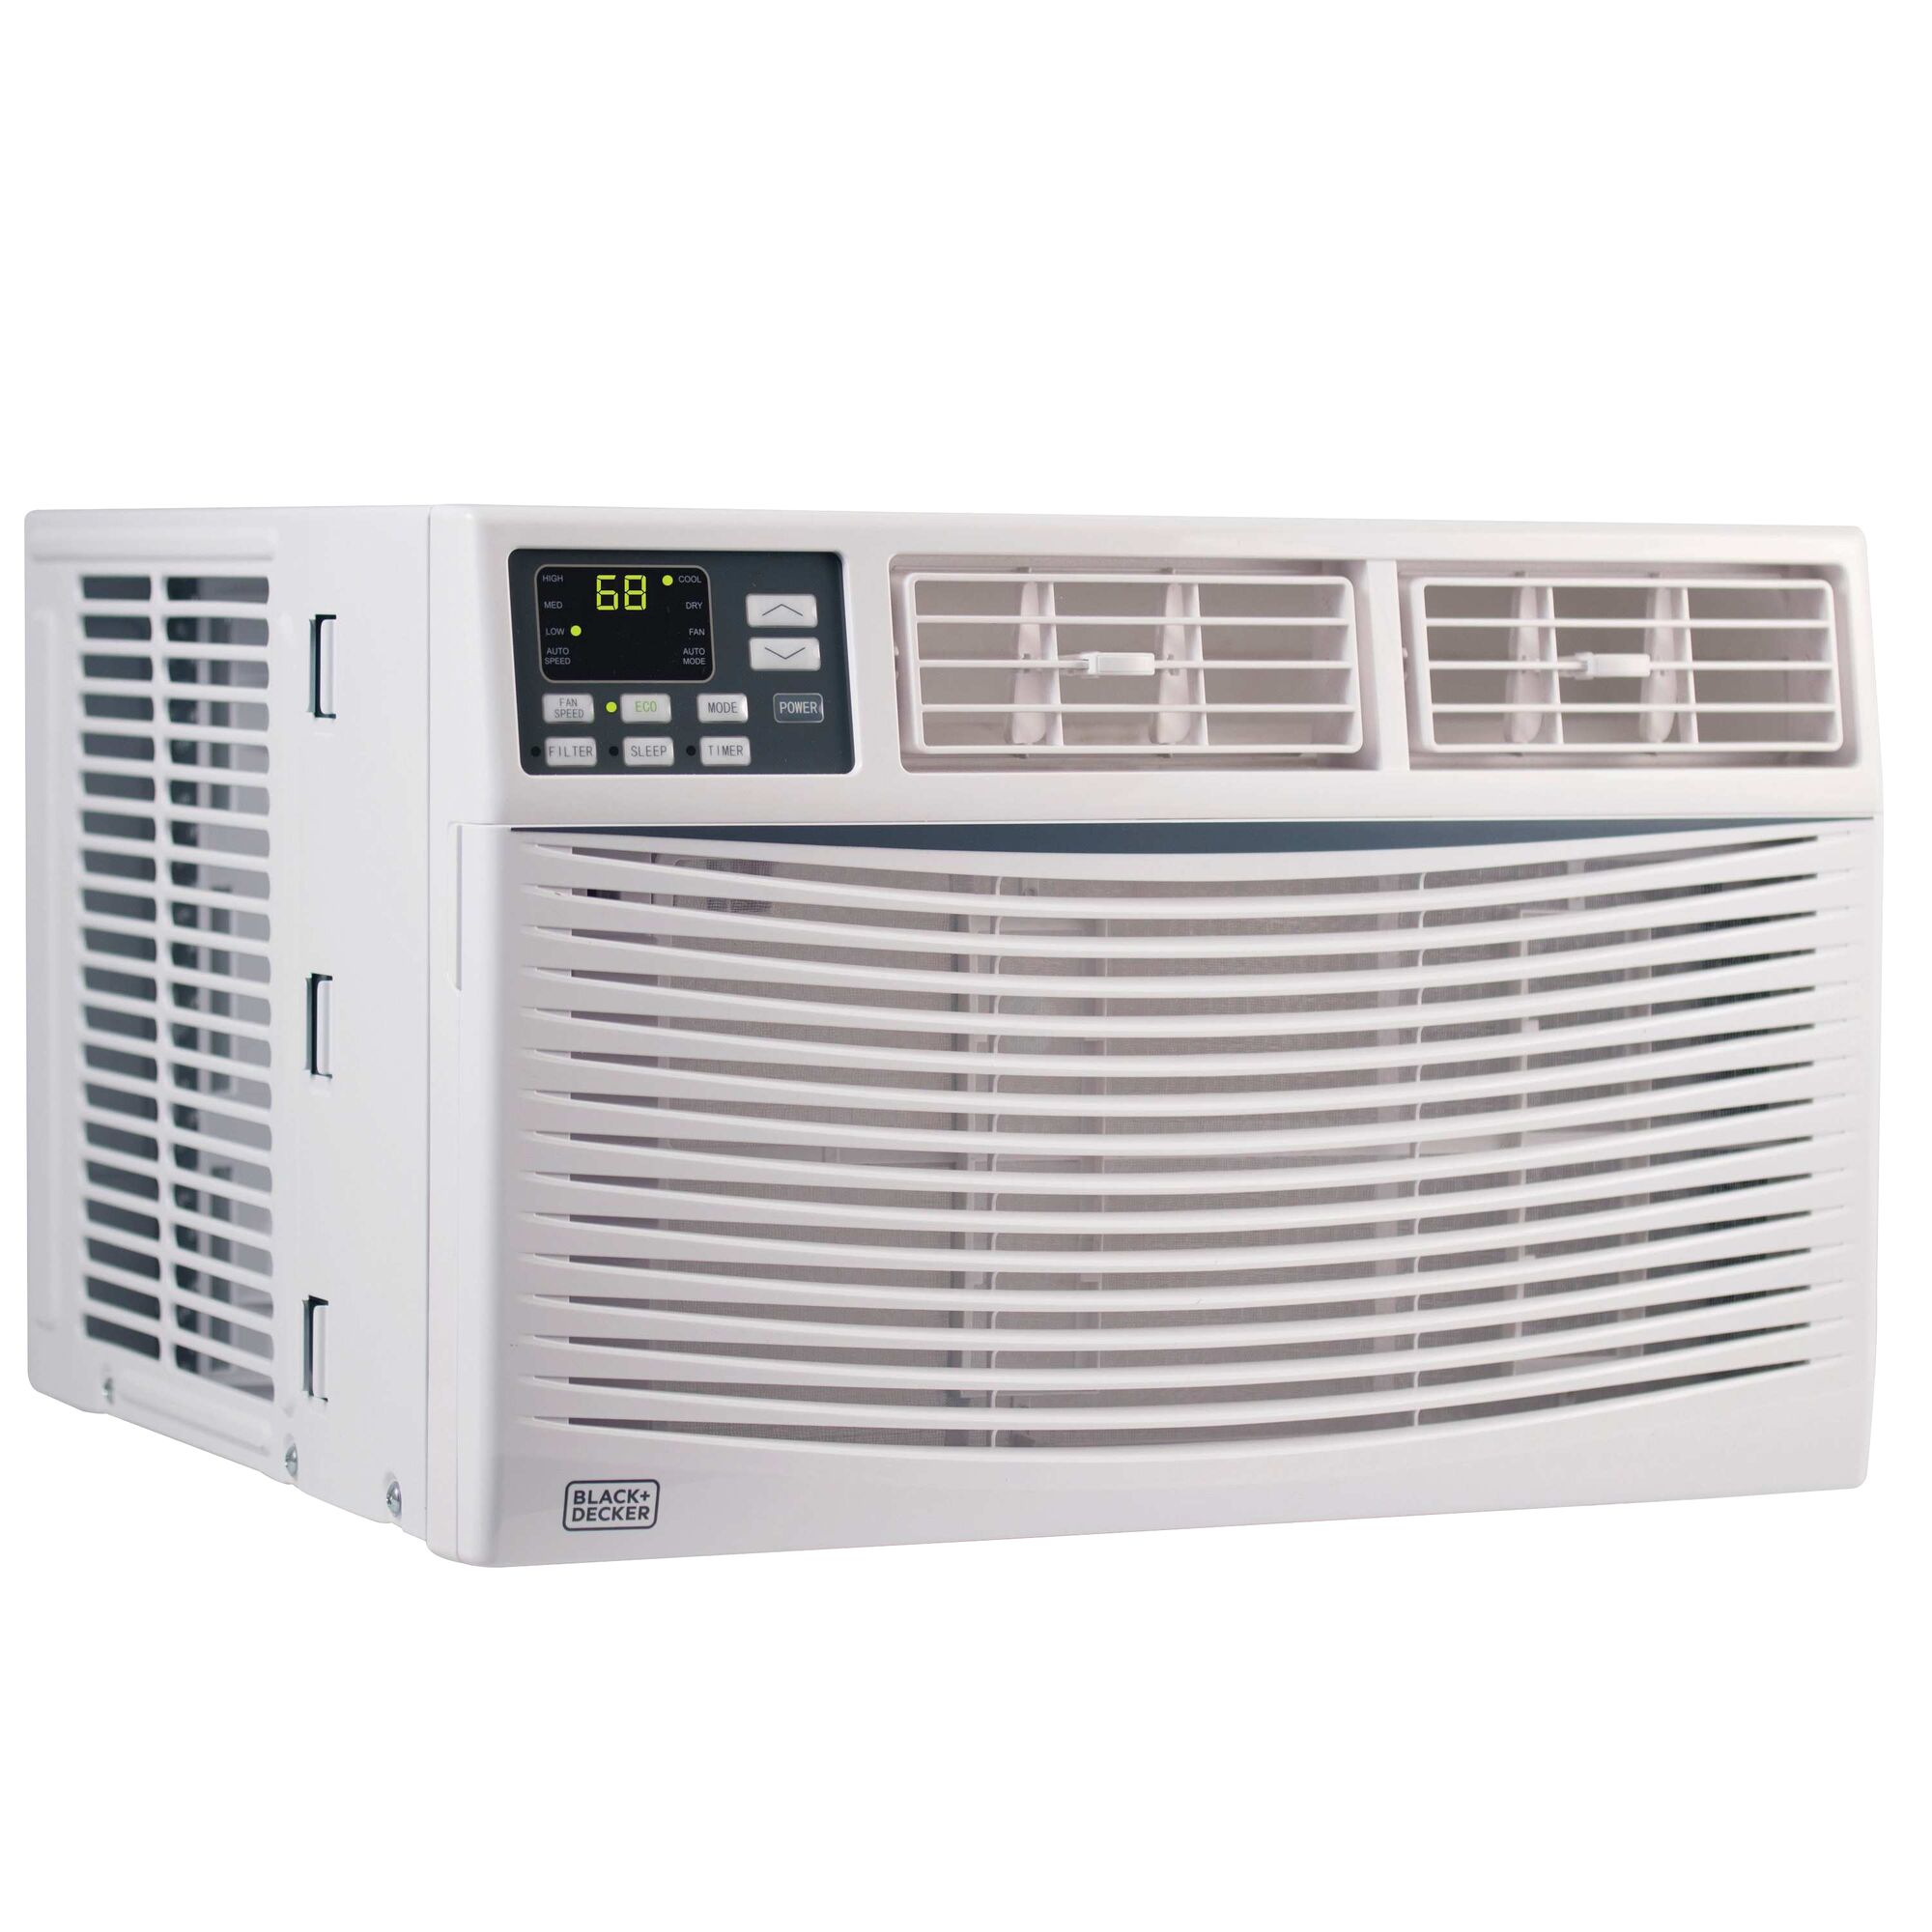 Profile of 12,000 Energy Star Electronic Air Conditioner with Remote.